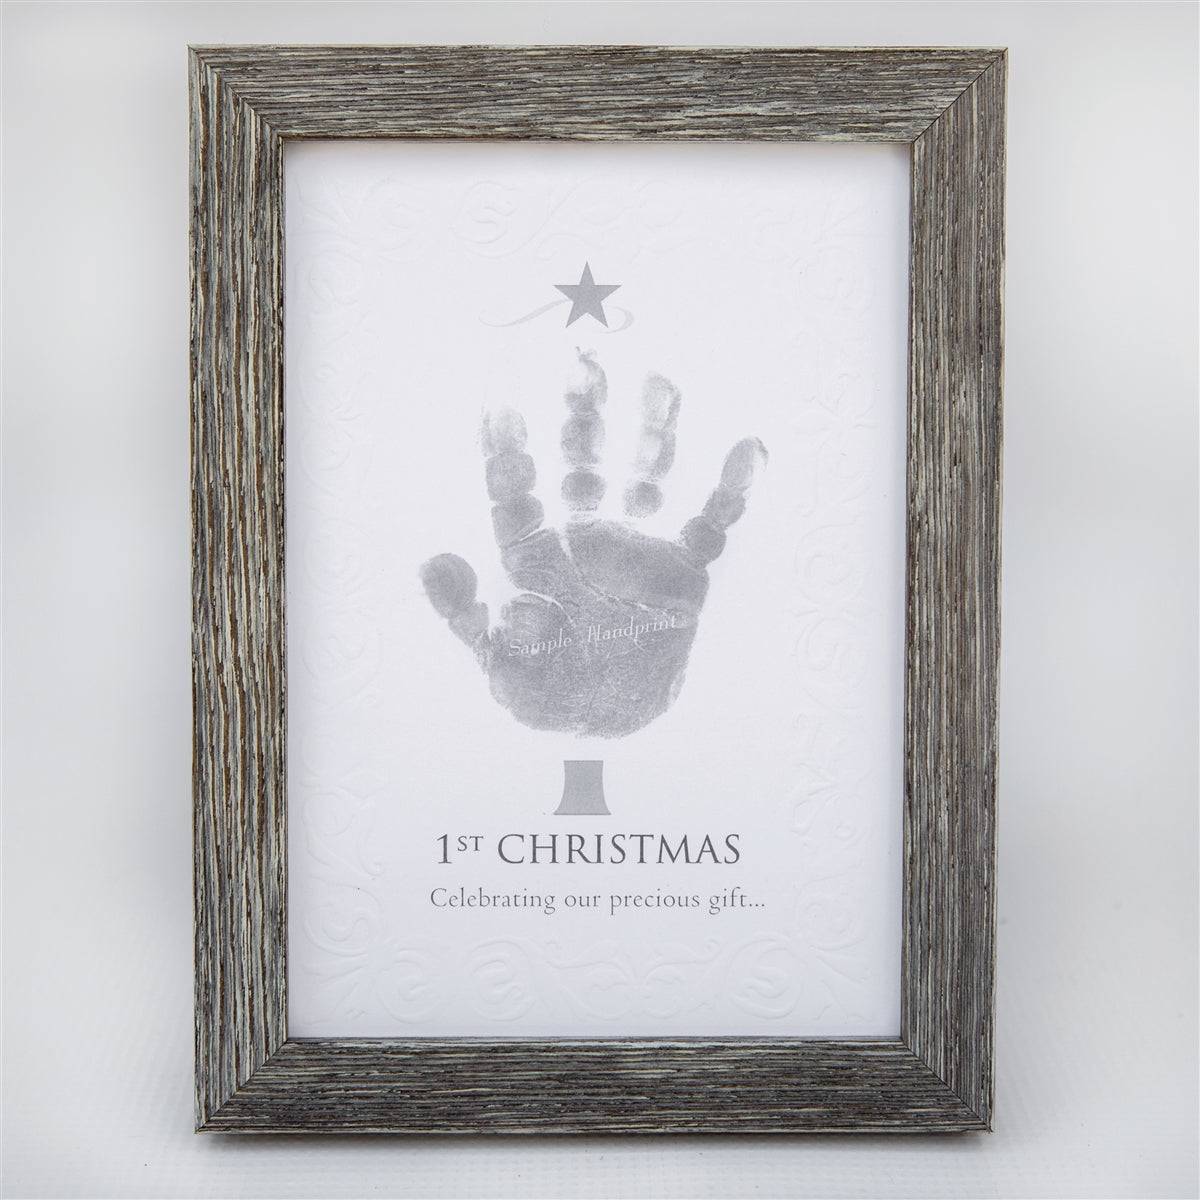 5x7 farmhouse frame with &quot;1st Christmas&quot; sentiment on embossed cardstock with space for a child&#39;s handprint.